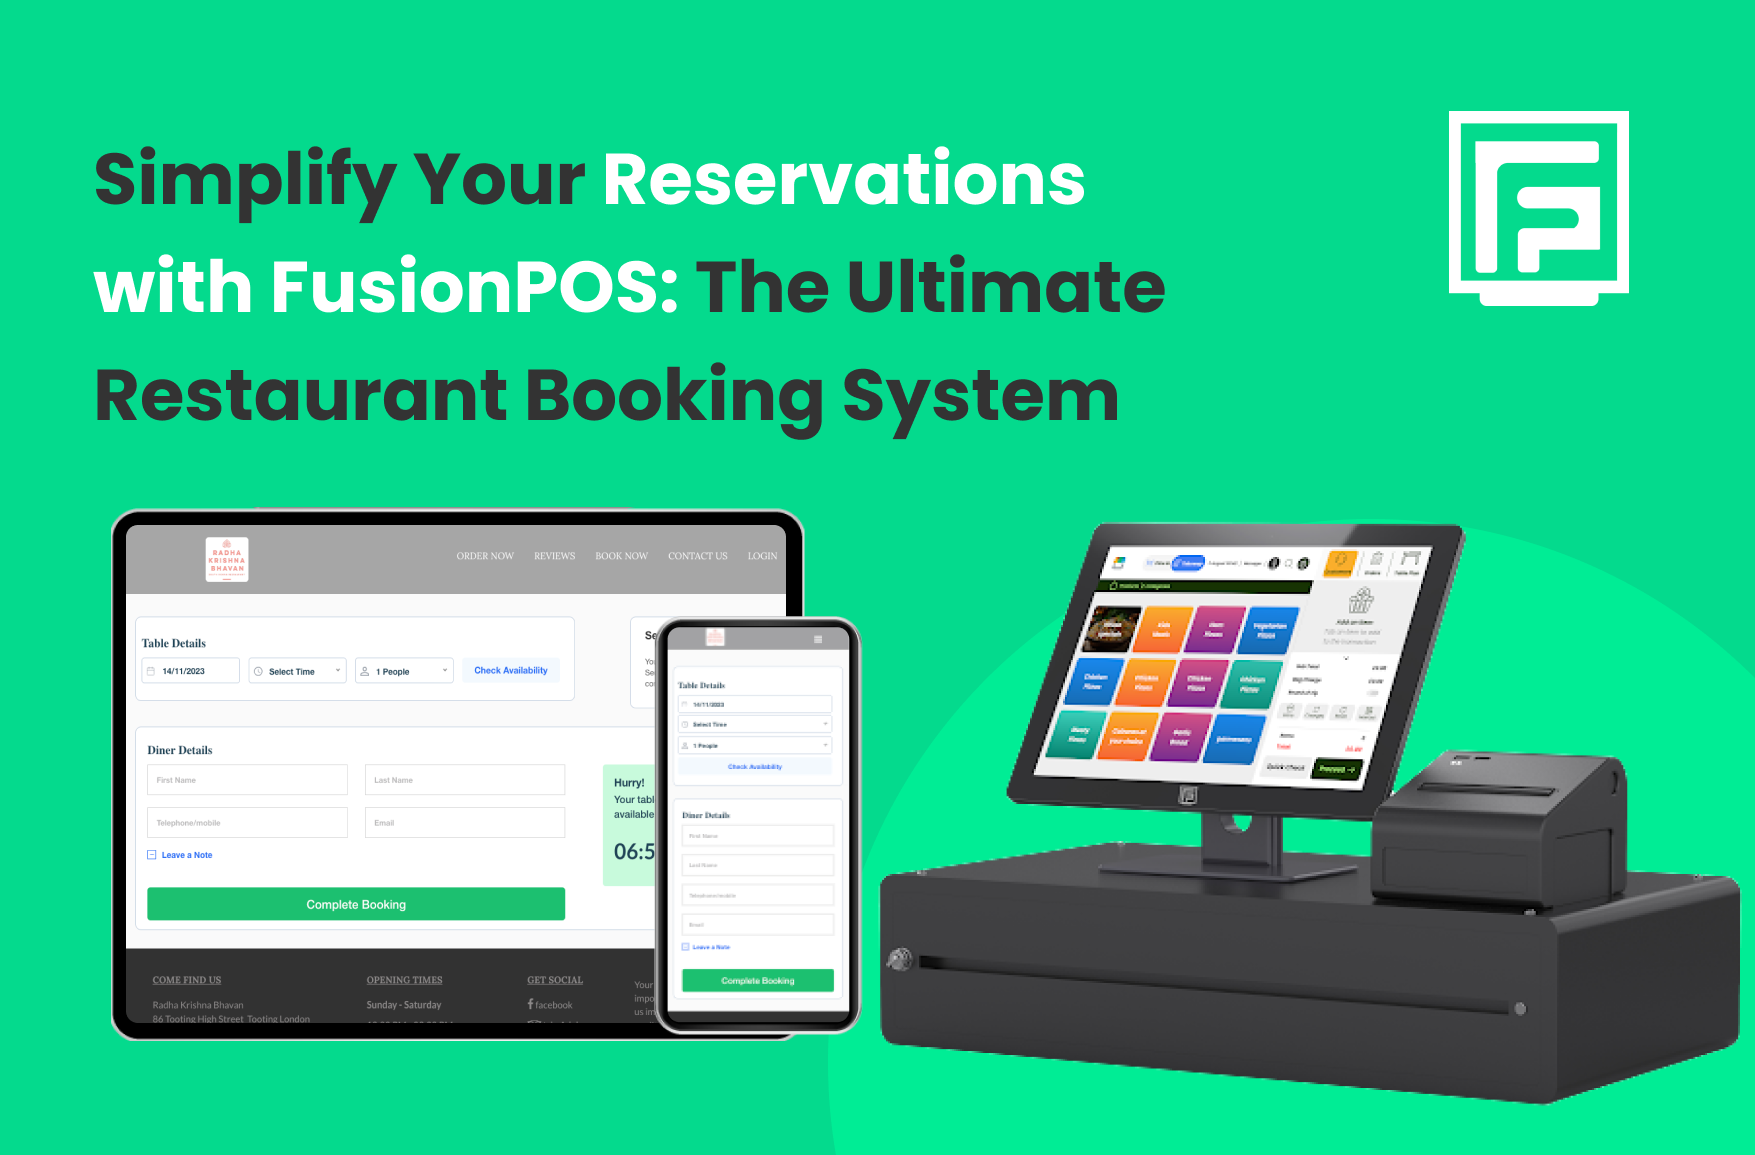 Simplify Your Reservations with FusionPOS